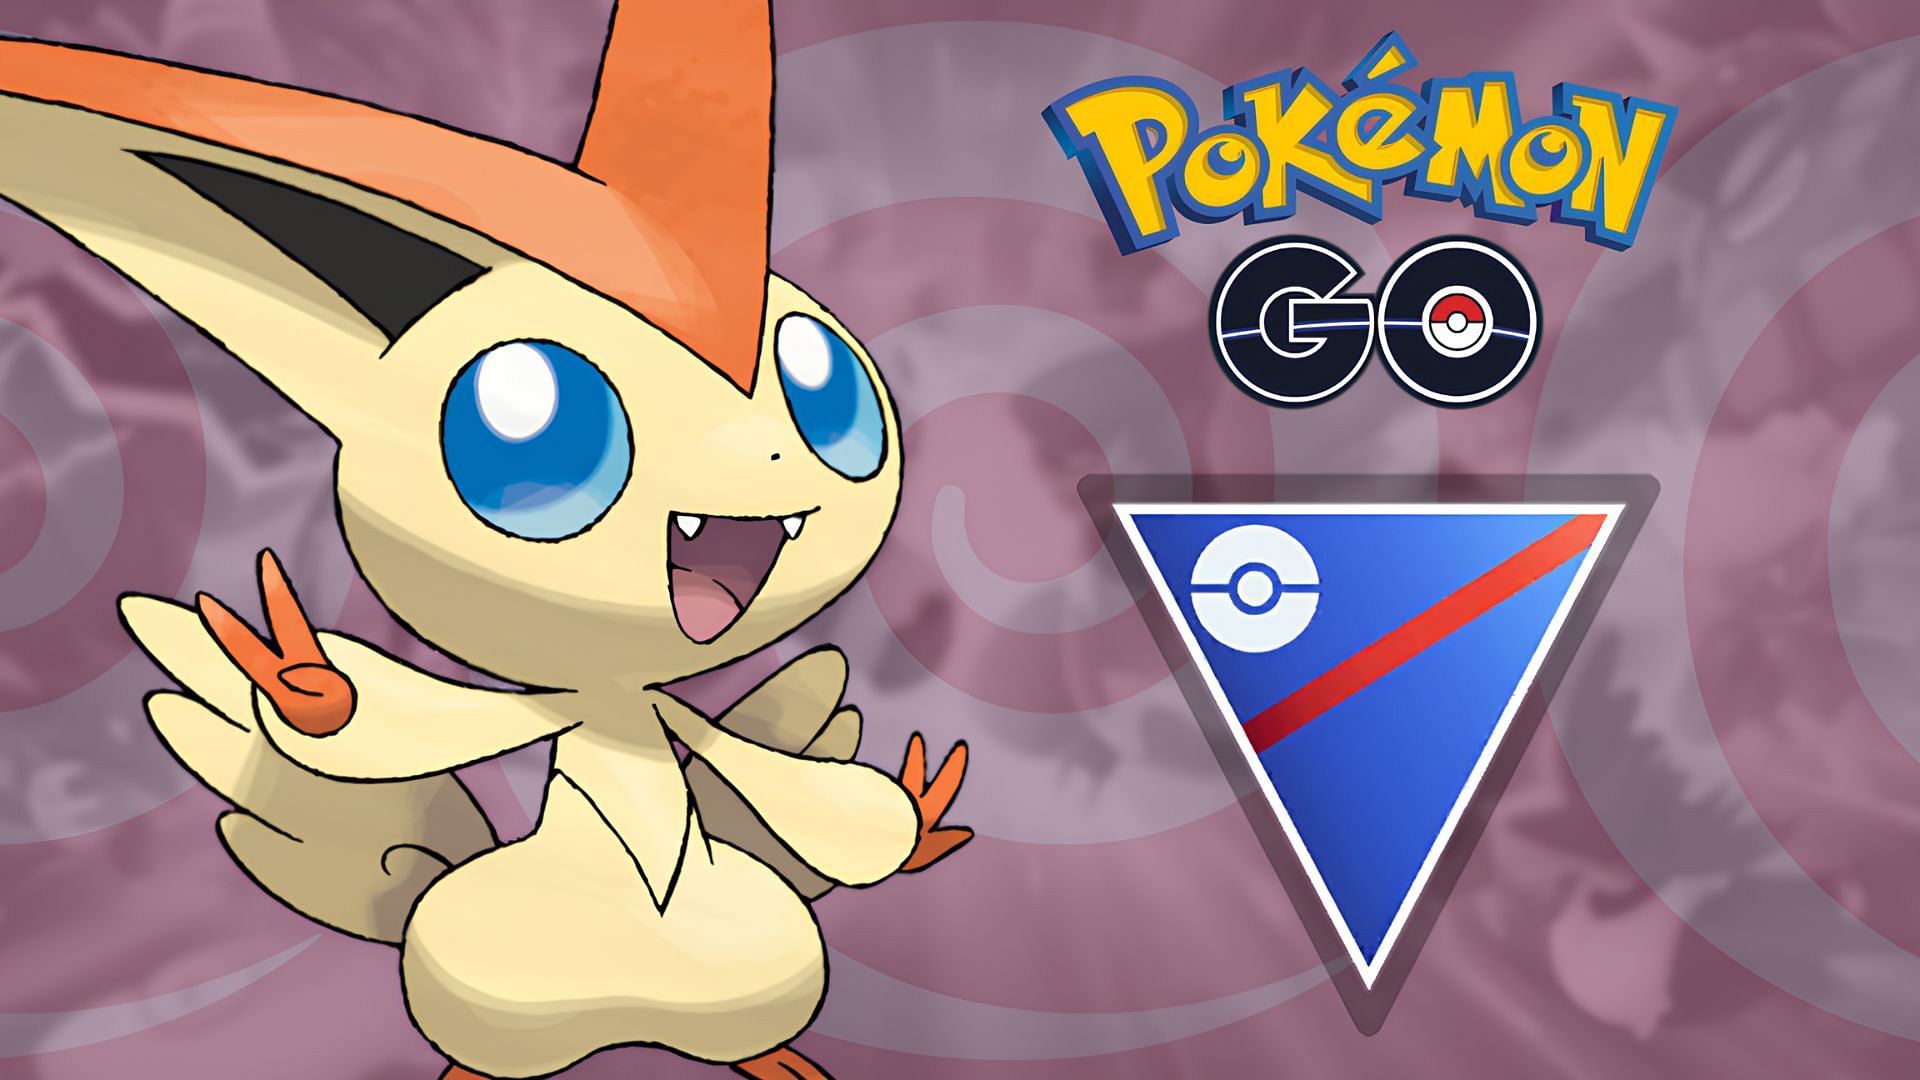 Psychic Cup in Pokémon GO: What are the best teams and moves? - Meristation